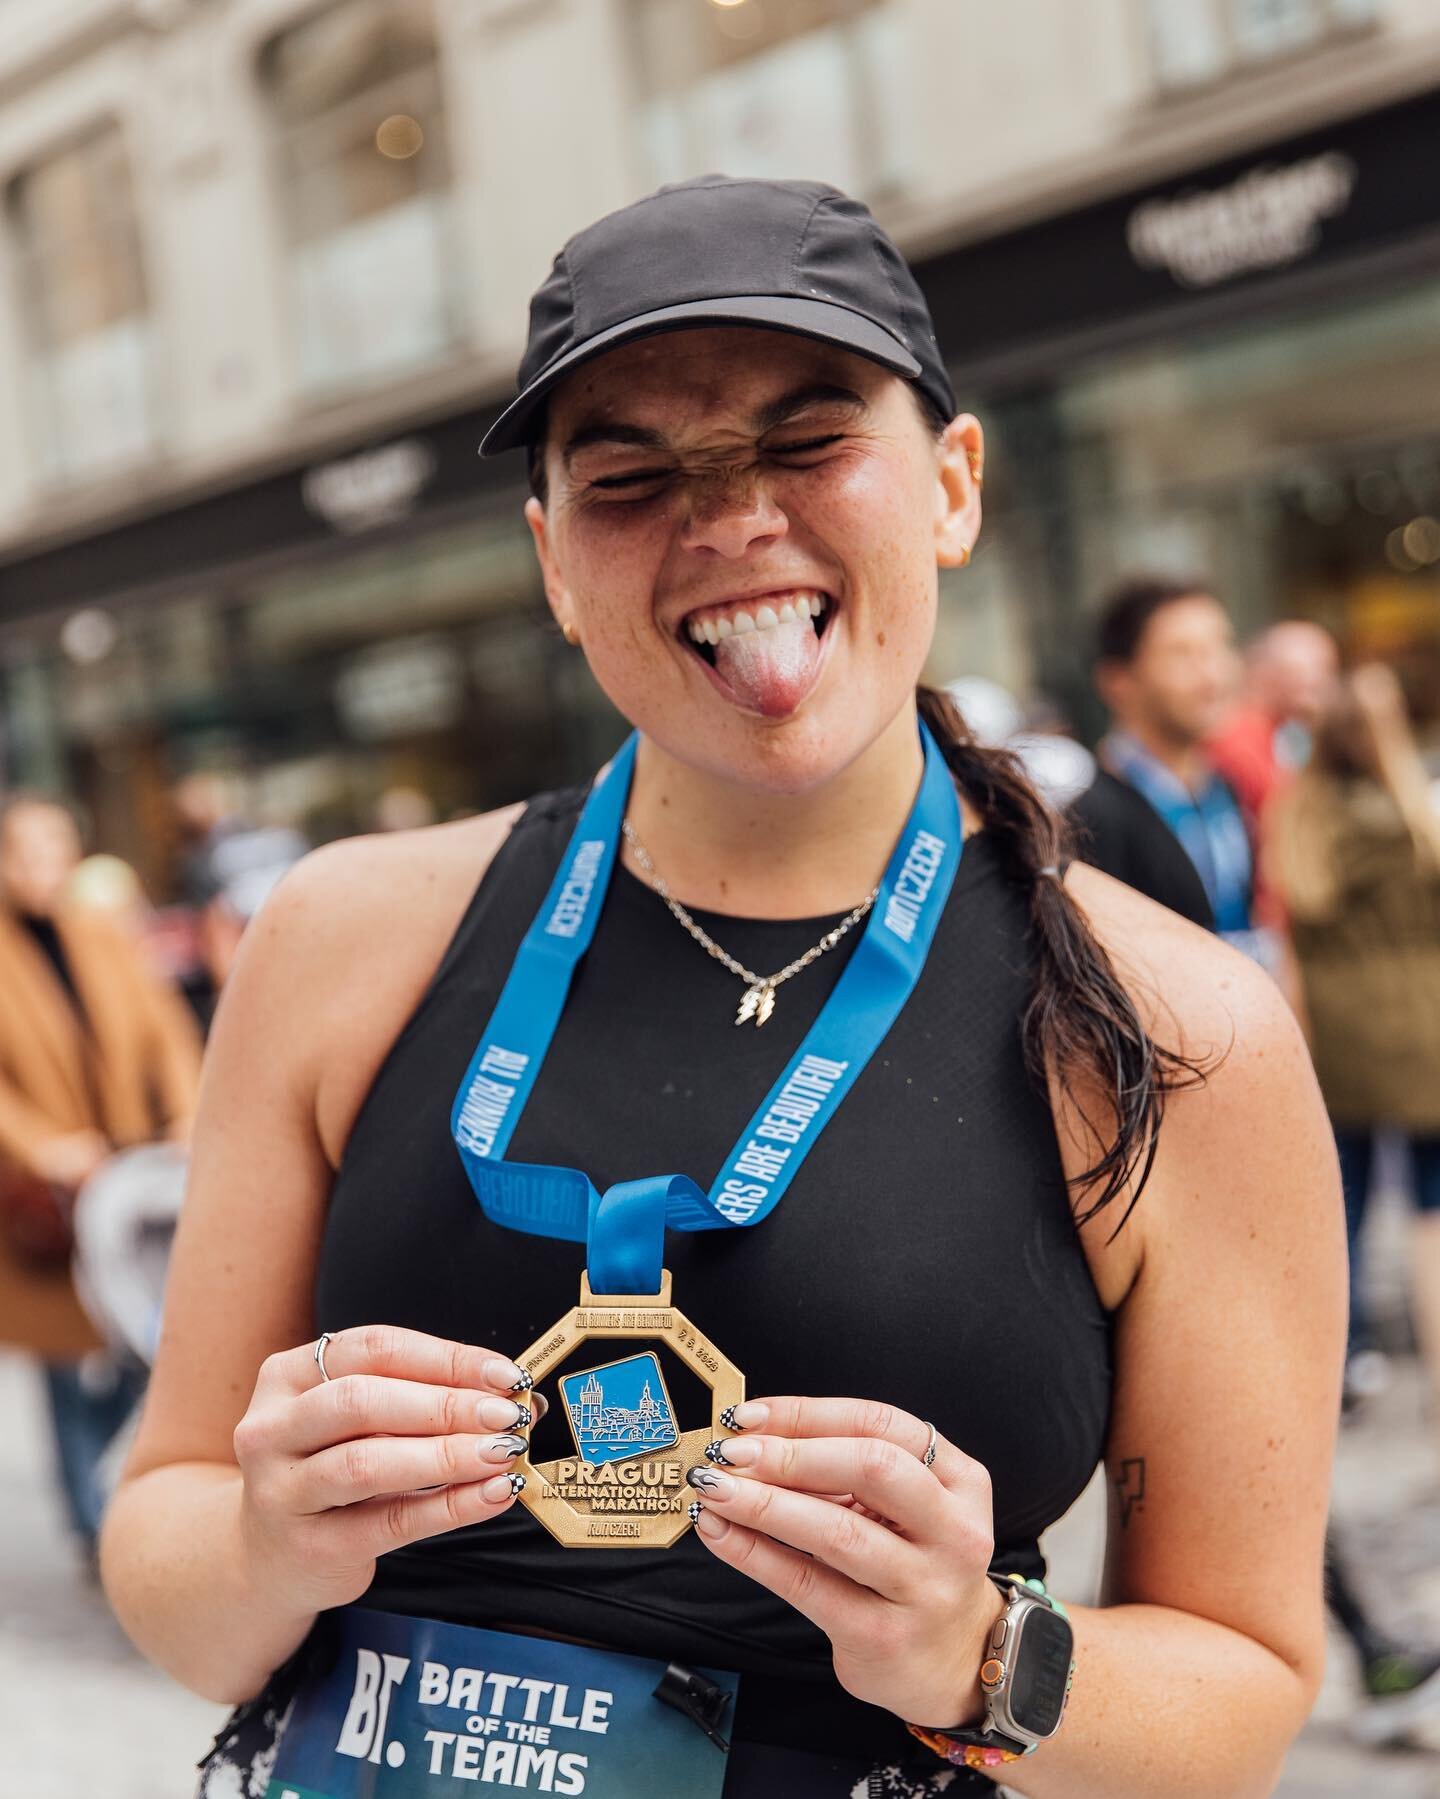 Today is #GlobalRunningDay! 🏃🏻&zwj;♀️⚡️ Throwback to another marathon ran, this time in Prague! 26.2 miles full of scenery, smiles, and obviously sweat 😝 Thankful for run club pals who joined the fun of bringing sexy pace racing abroad too! Also s